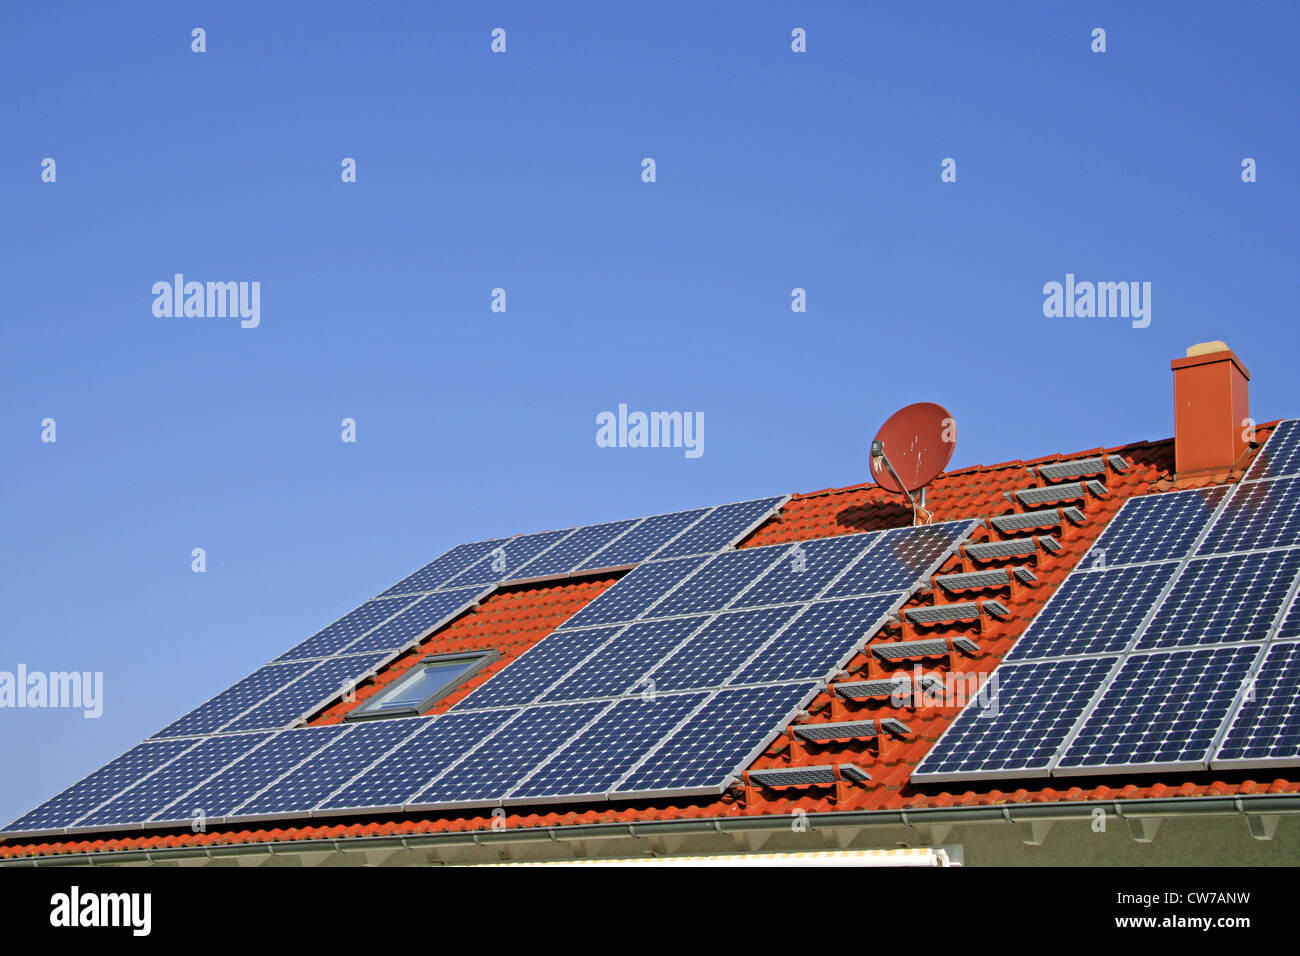 house with photovoltaic on the roof, Germany, Bavaria, Eckersdorf Stock Photo